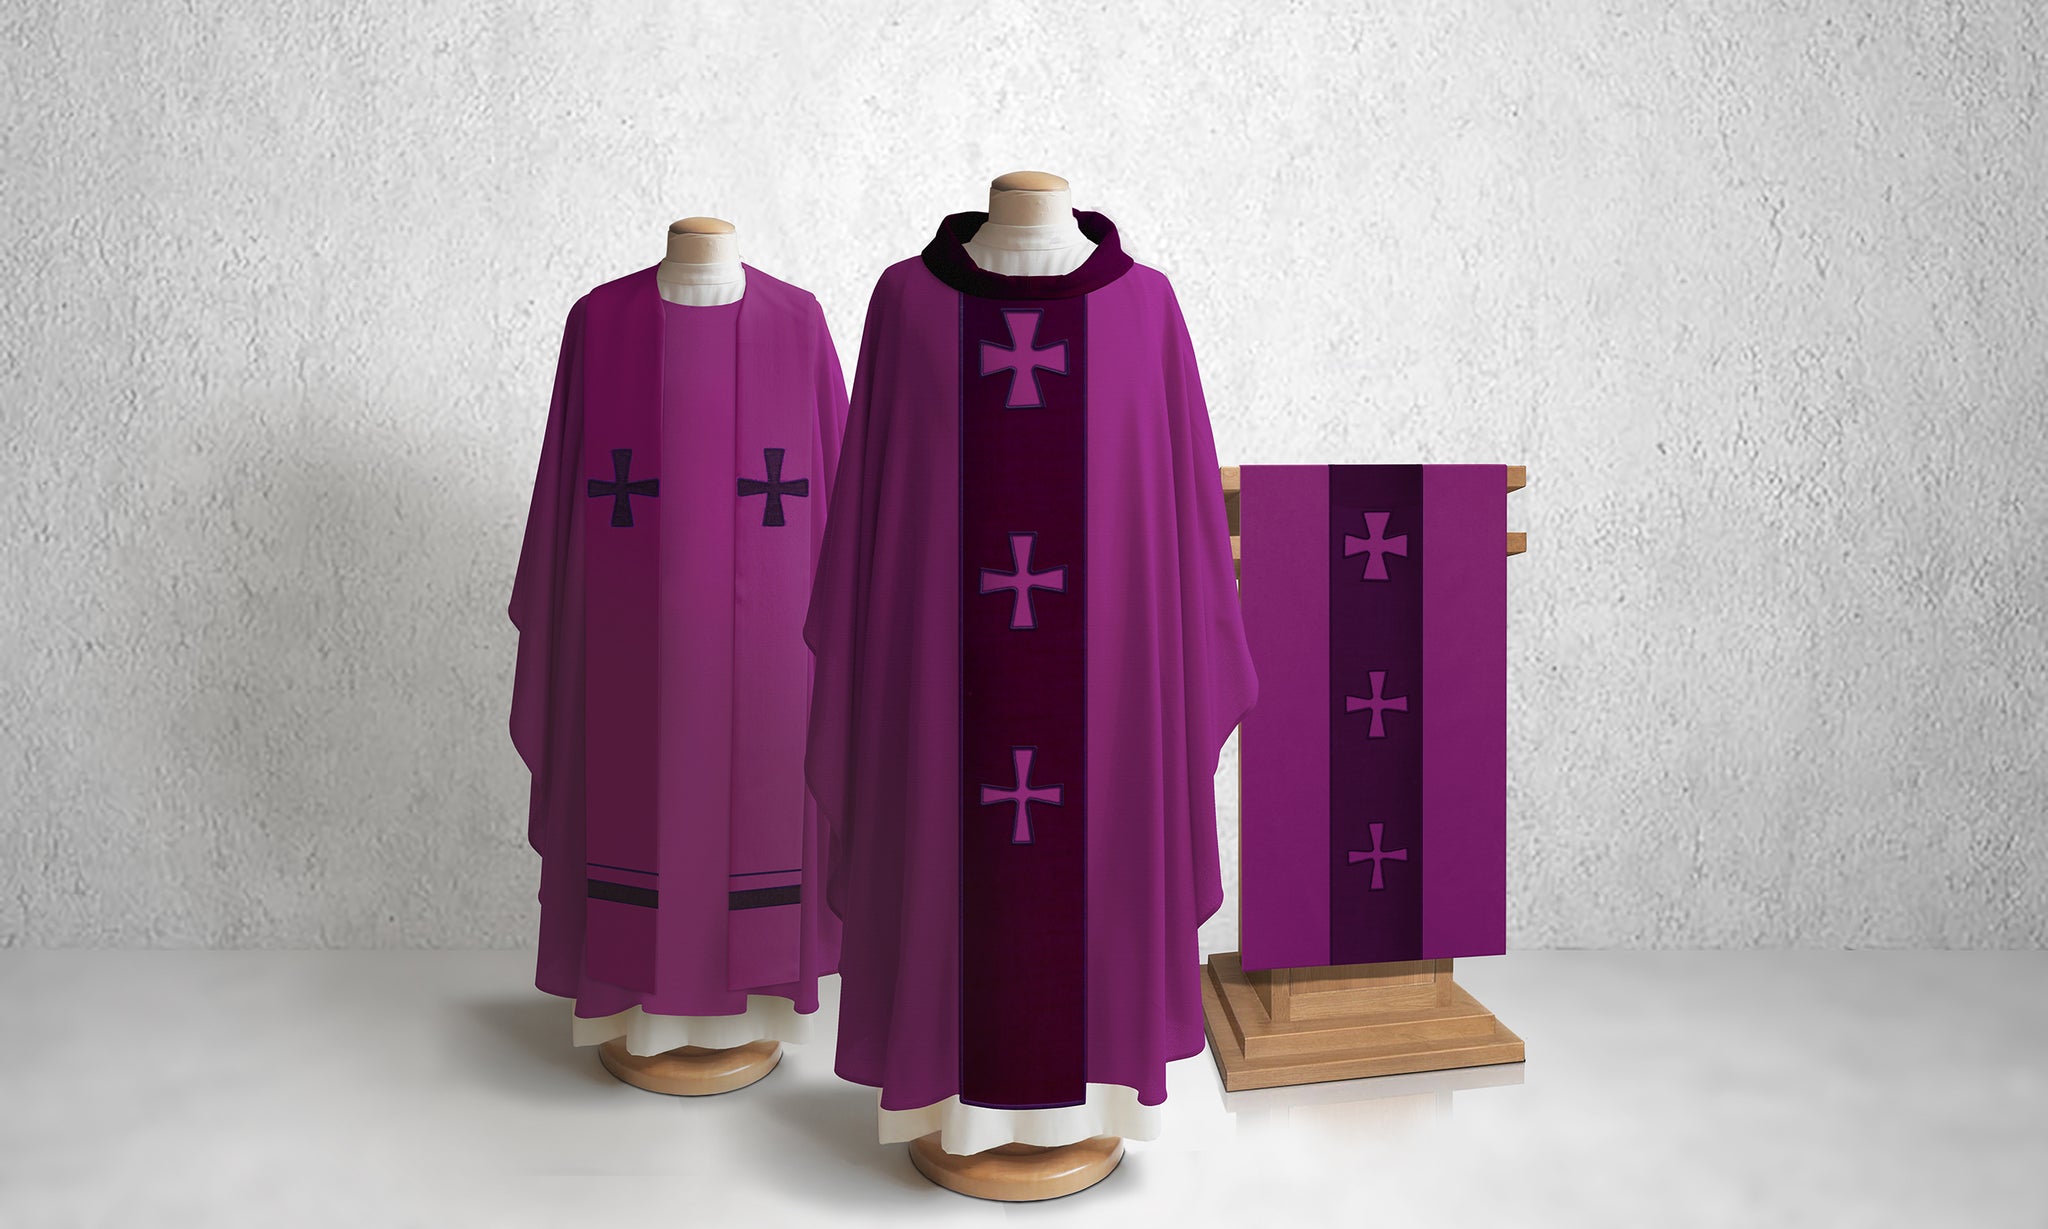 376 Crucifixion Lectern Hanging in Purple